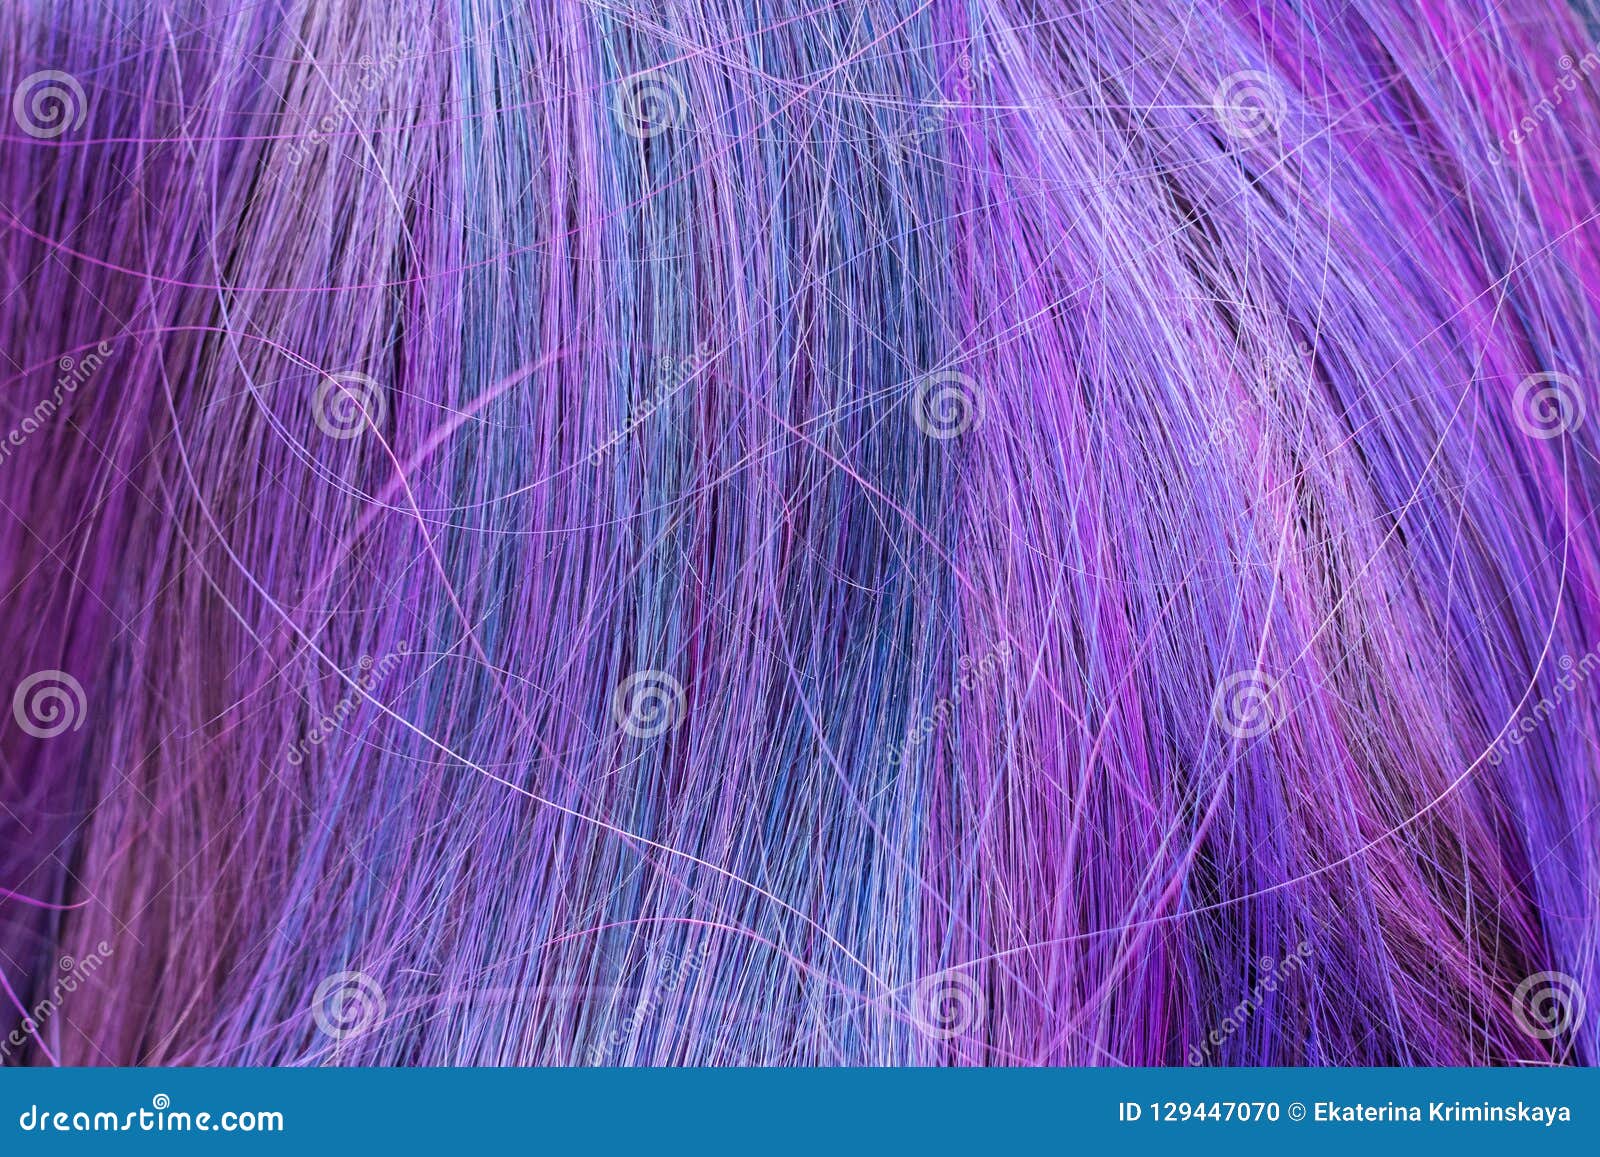 Blue Purple Pink Hair Color on Different Hair Types - wide 8